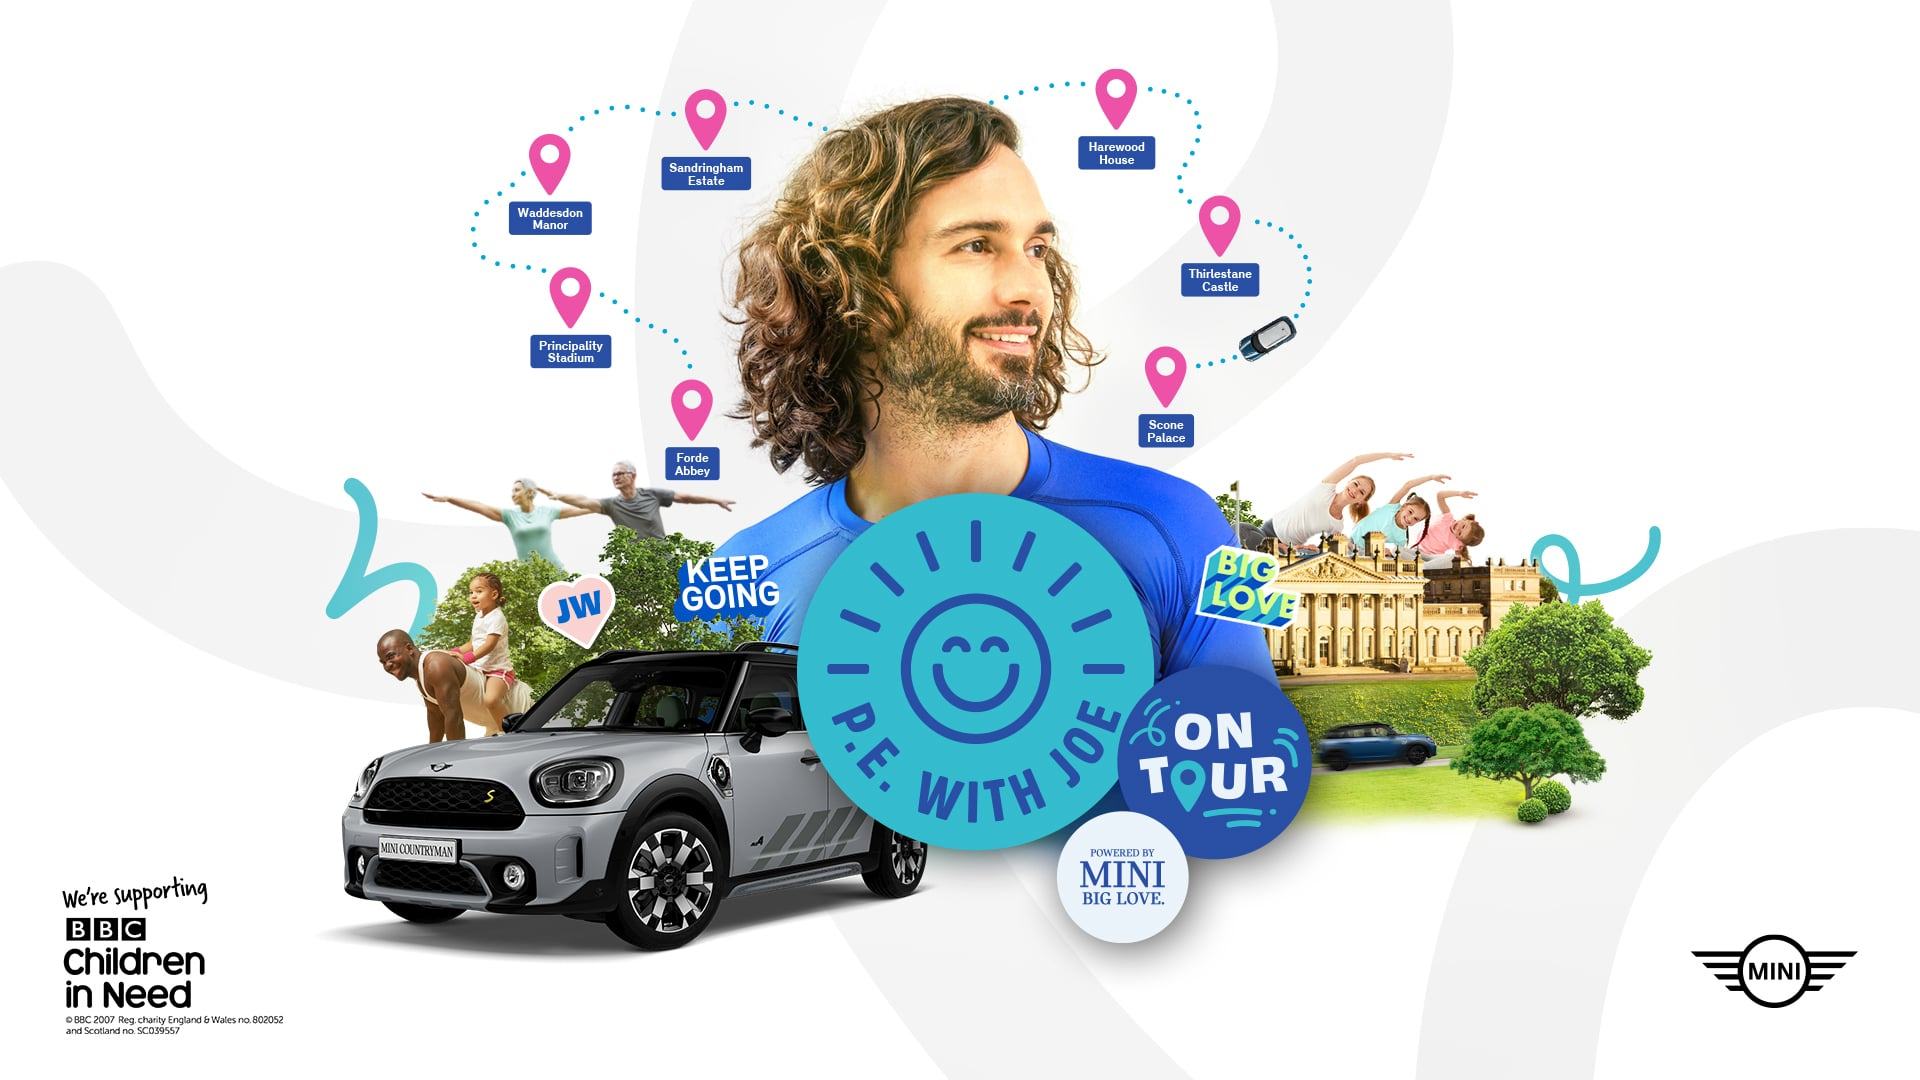 Image name joe wicks on tour mini big love children in need the 5 image from the post Joe Wicks will be at Harewood House in Yorkshire in Yorkshire.com.